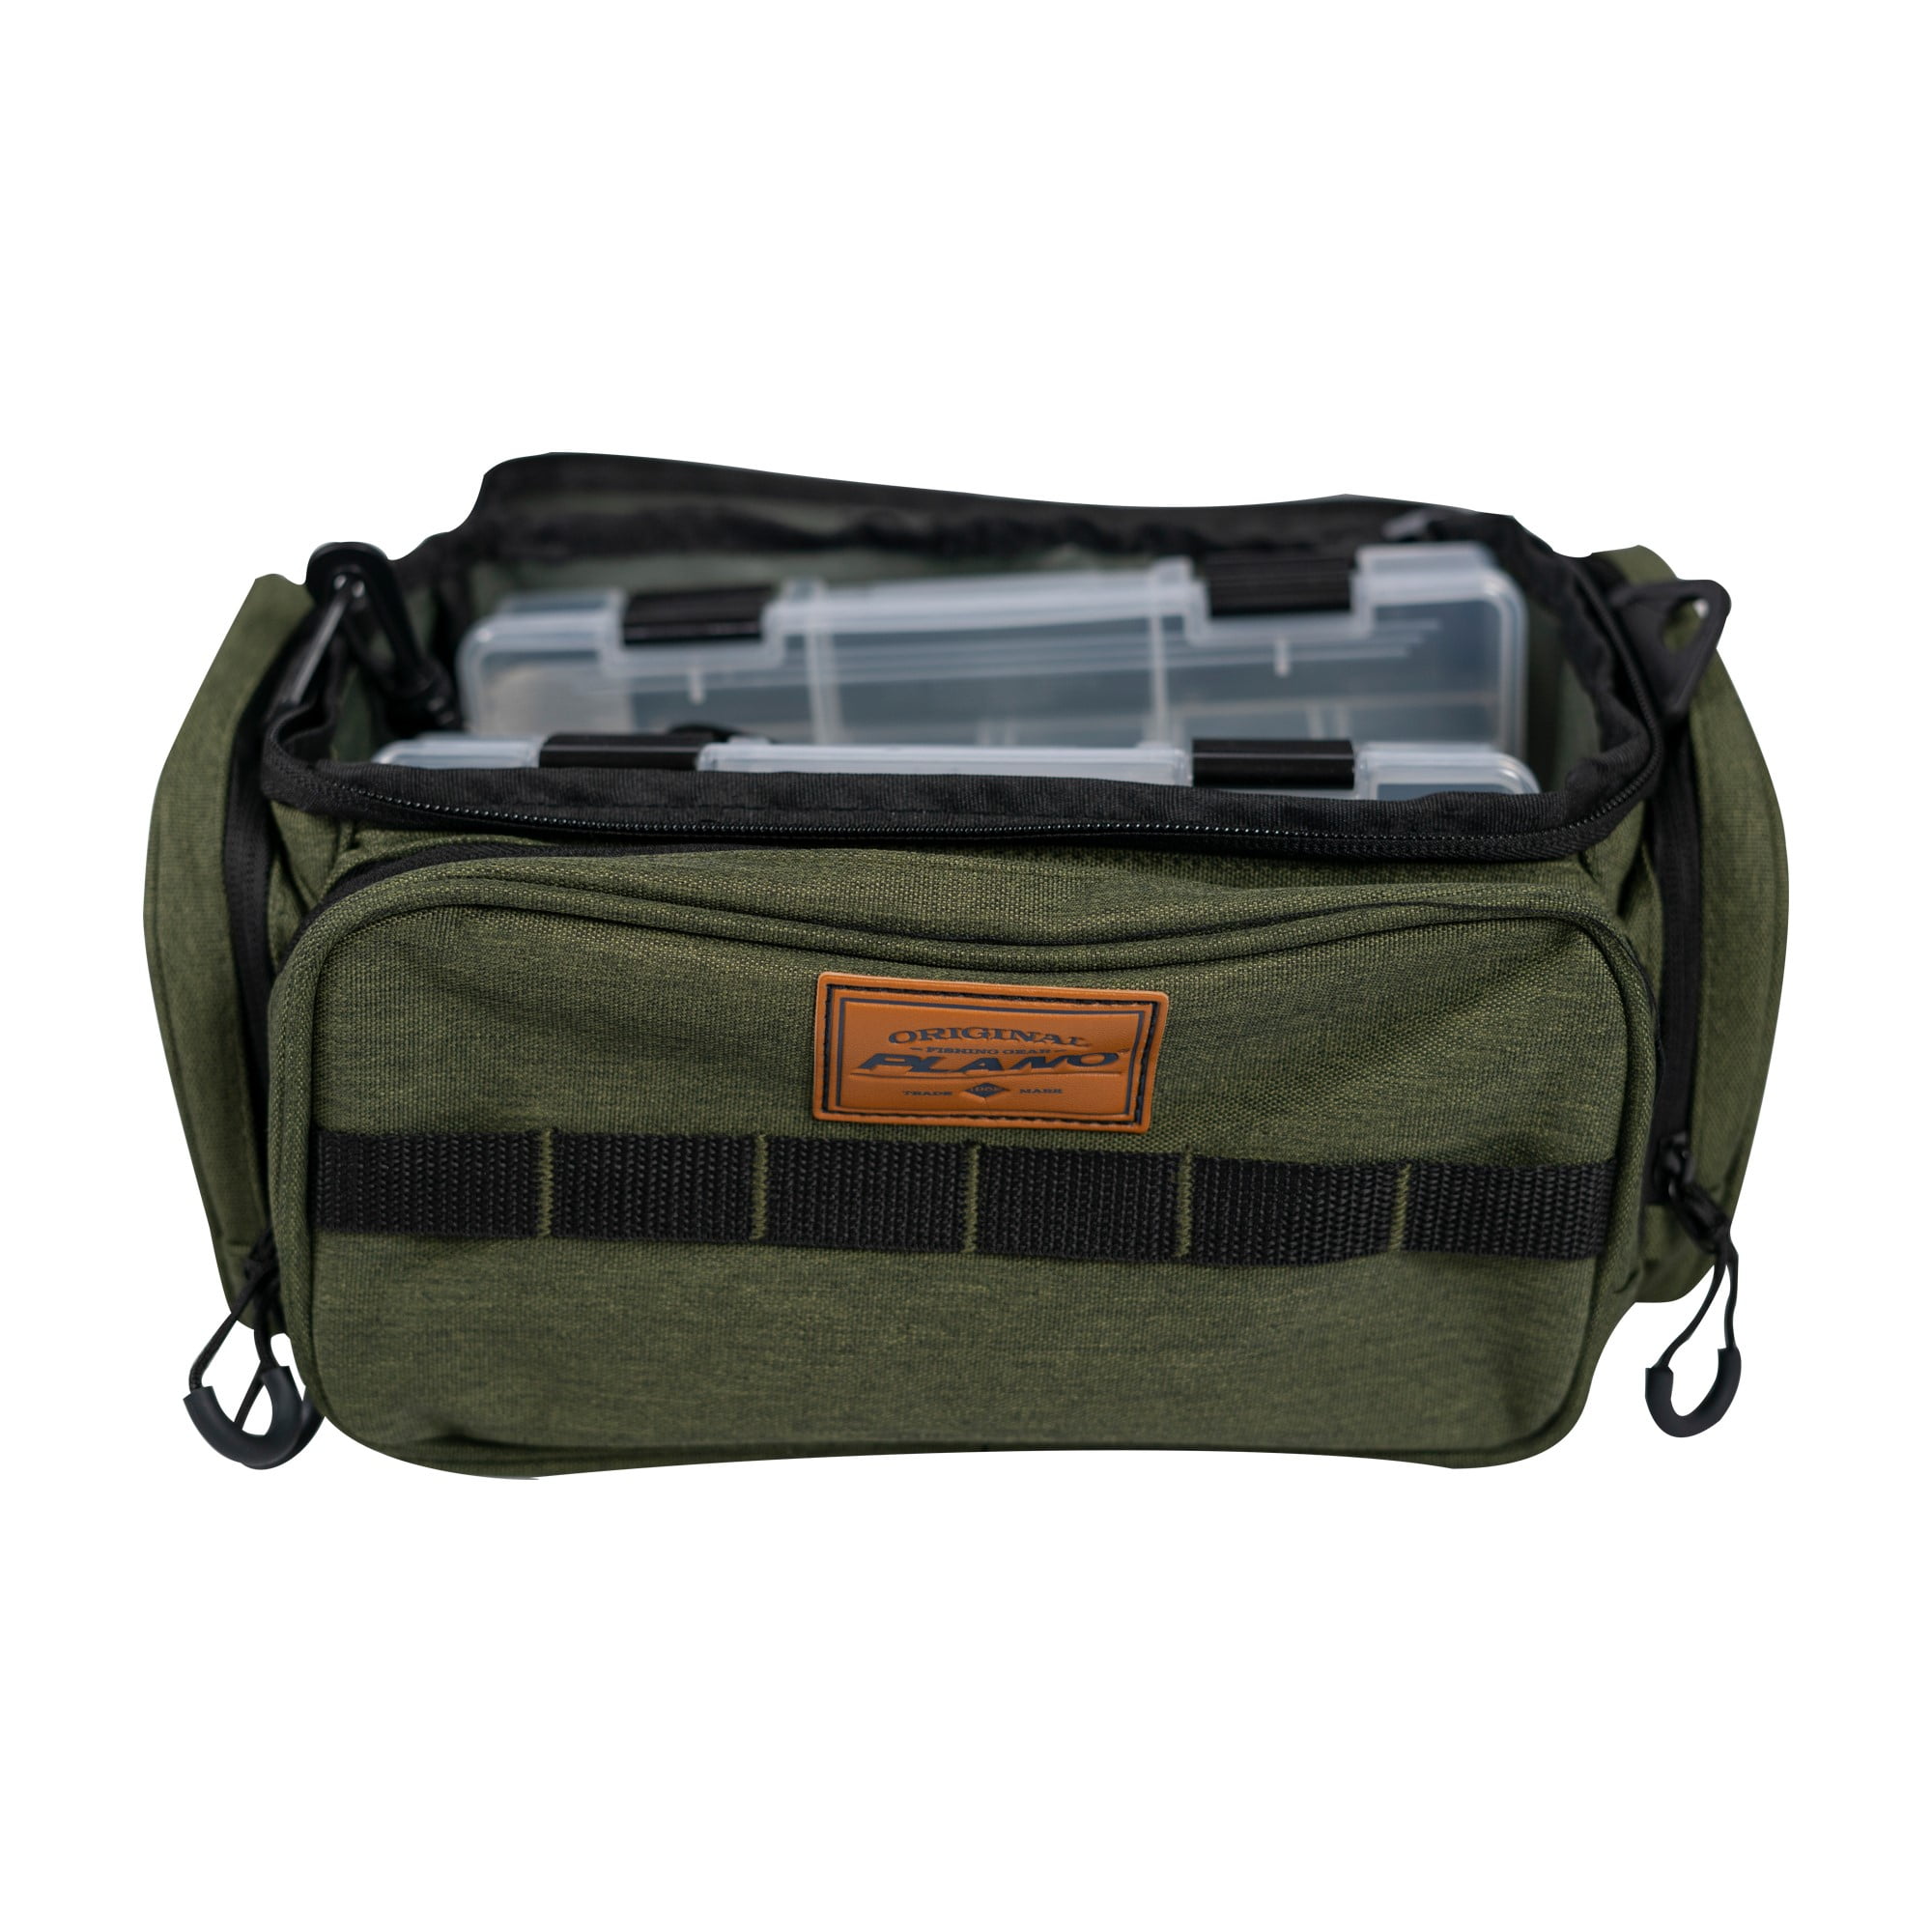 Plano Guide Series 3500 Tackle Bag with Five 3500 StowAway